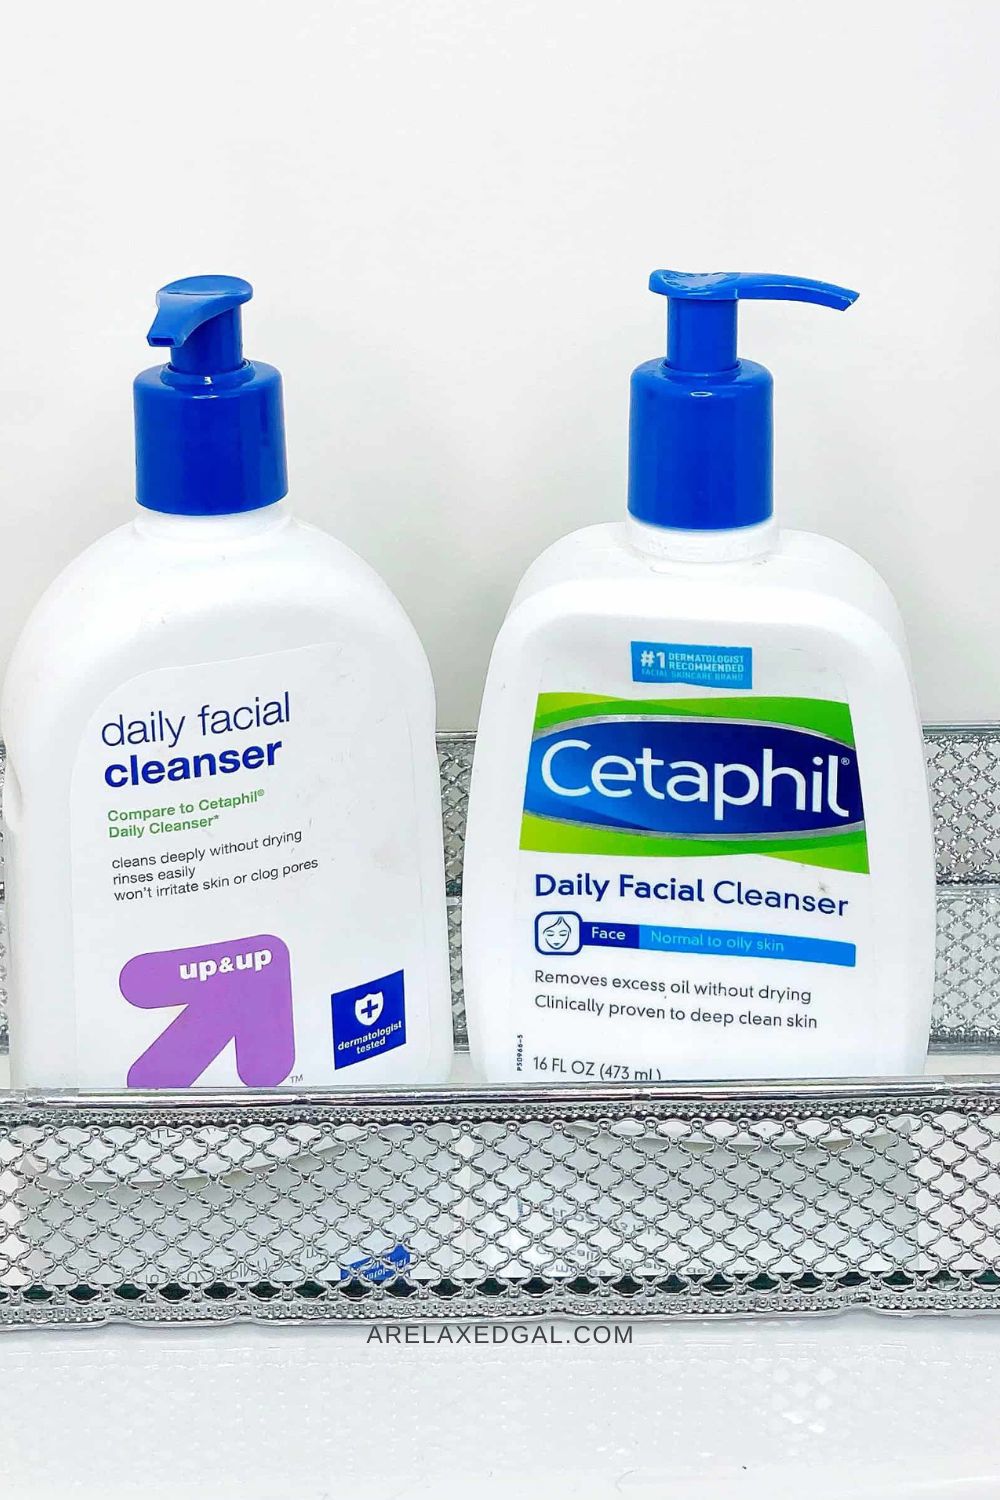 target up & up daily facial cleanser sitting next to cetaphil daily facial cleanser.